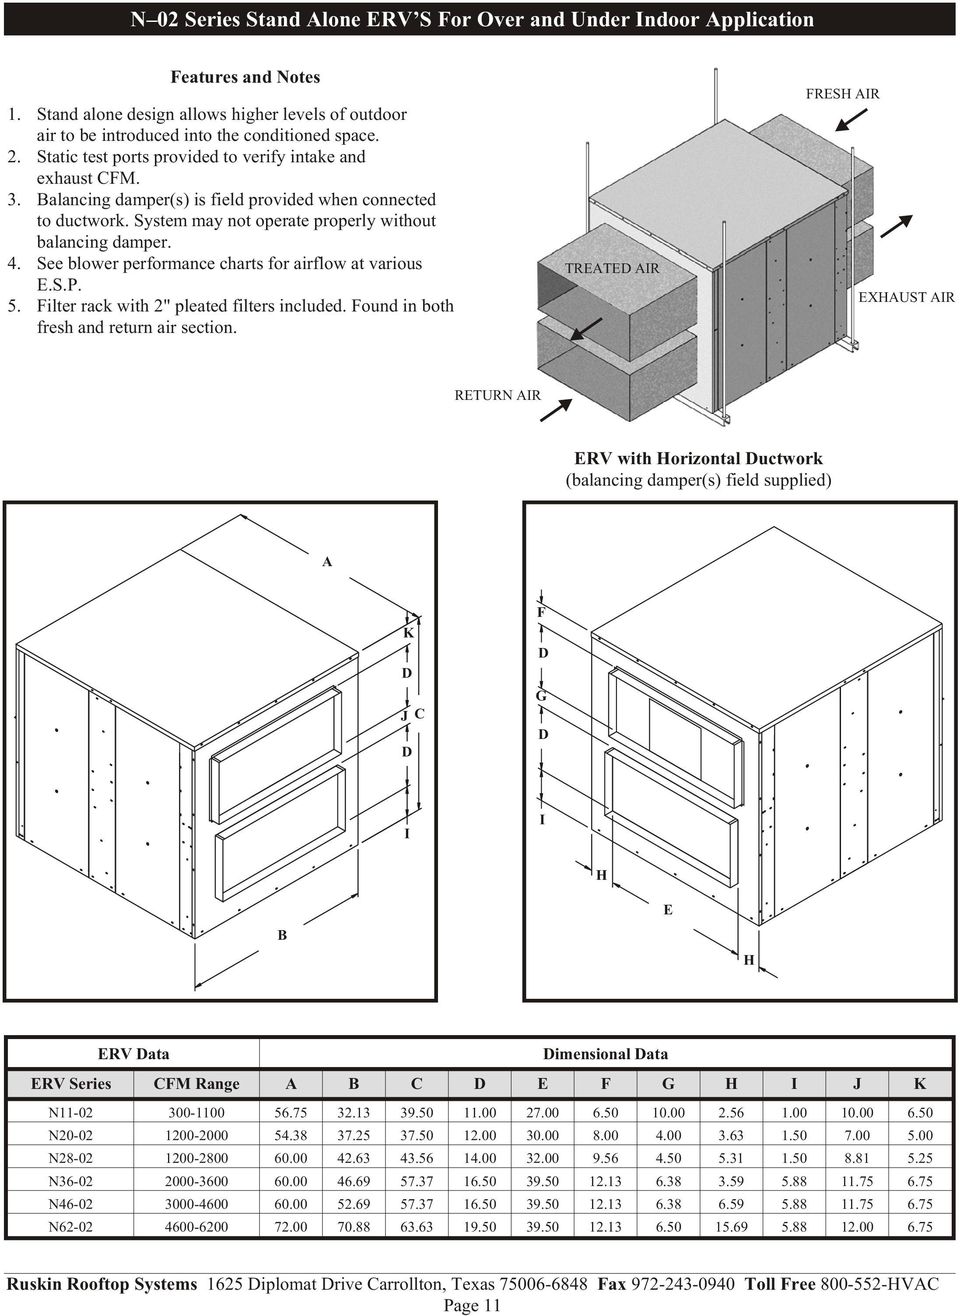 See blower performance charts for airflow at various E.S.P. 5. Filter rack with 2" pleated filters included. Found in both fresh and return air section.